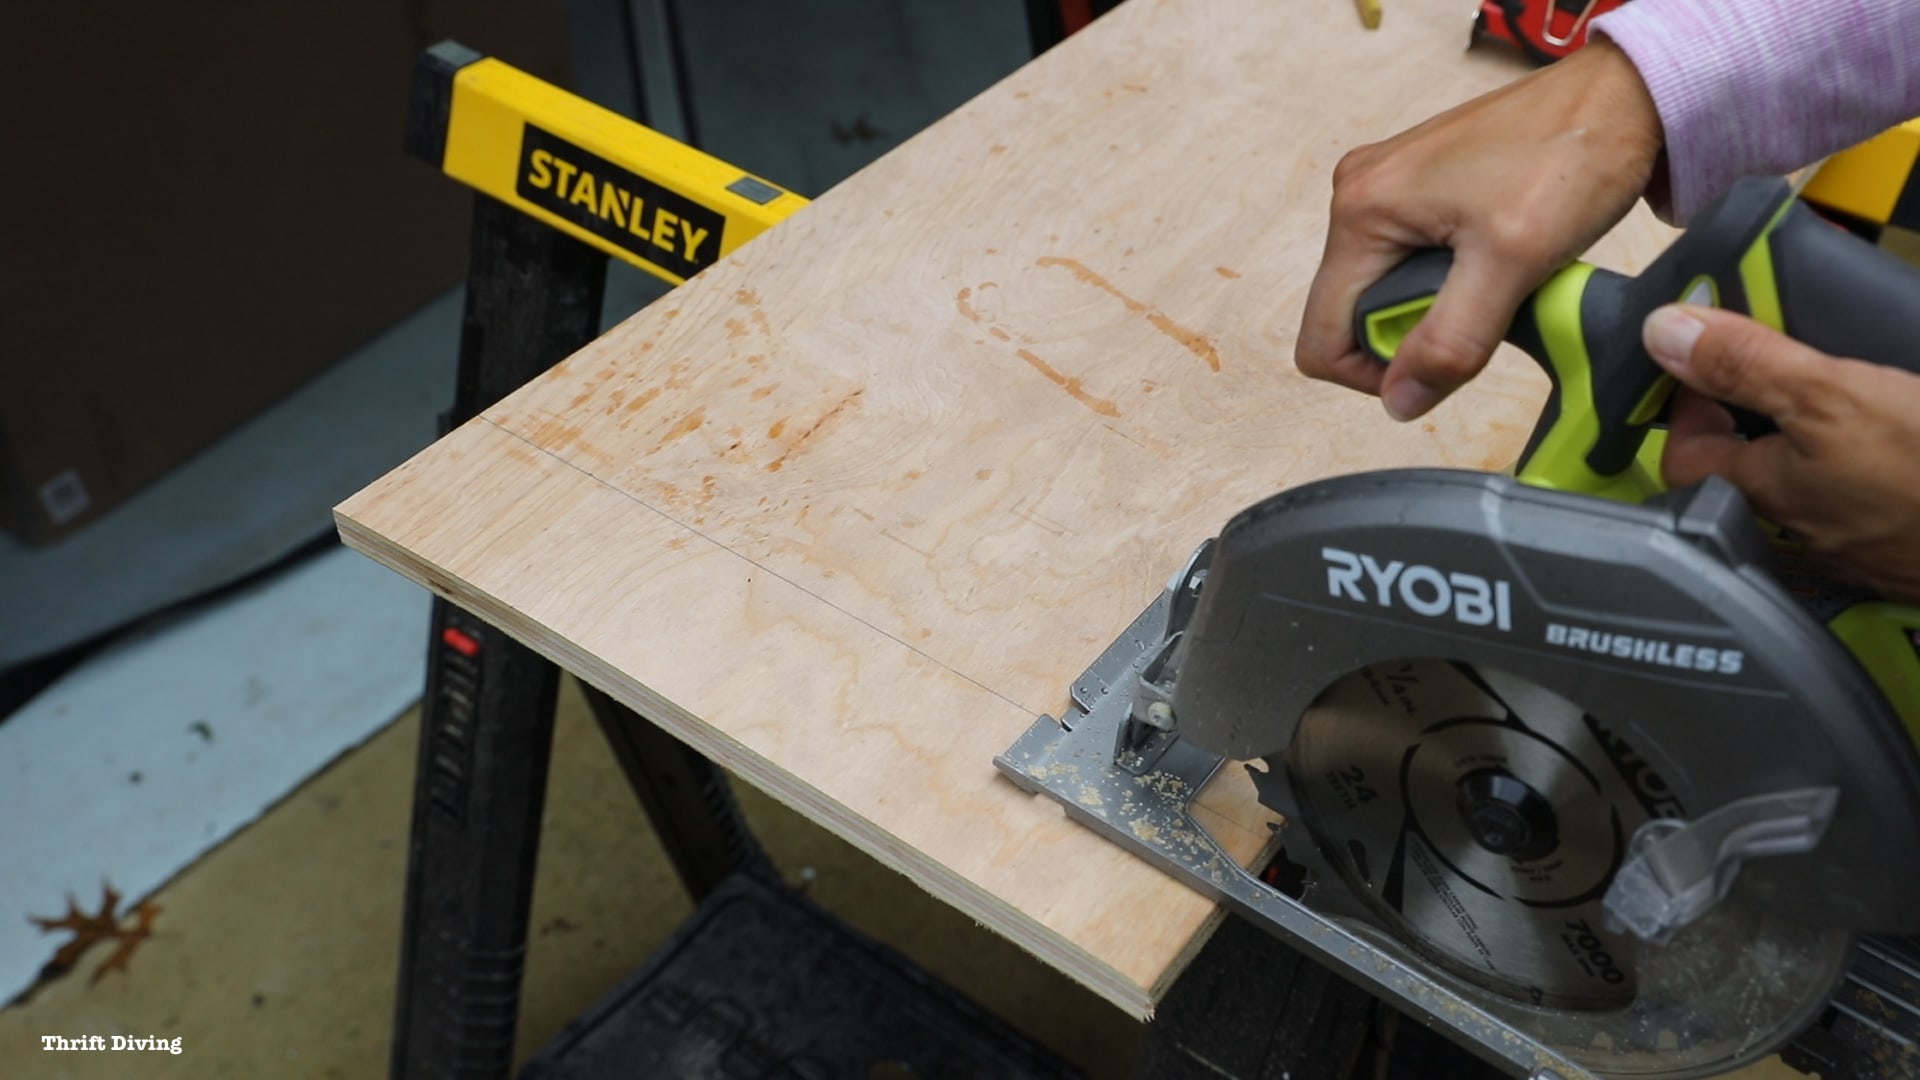 How to Use a Circular Saw - Cut your wood with the blade running at full speed before making contact with the wood. - Thrift Diving